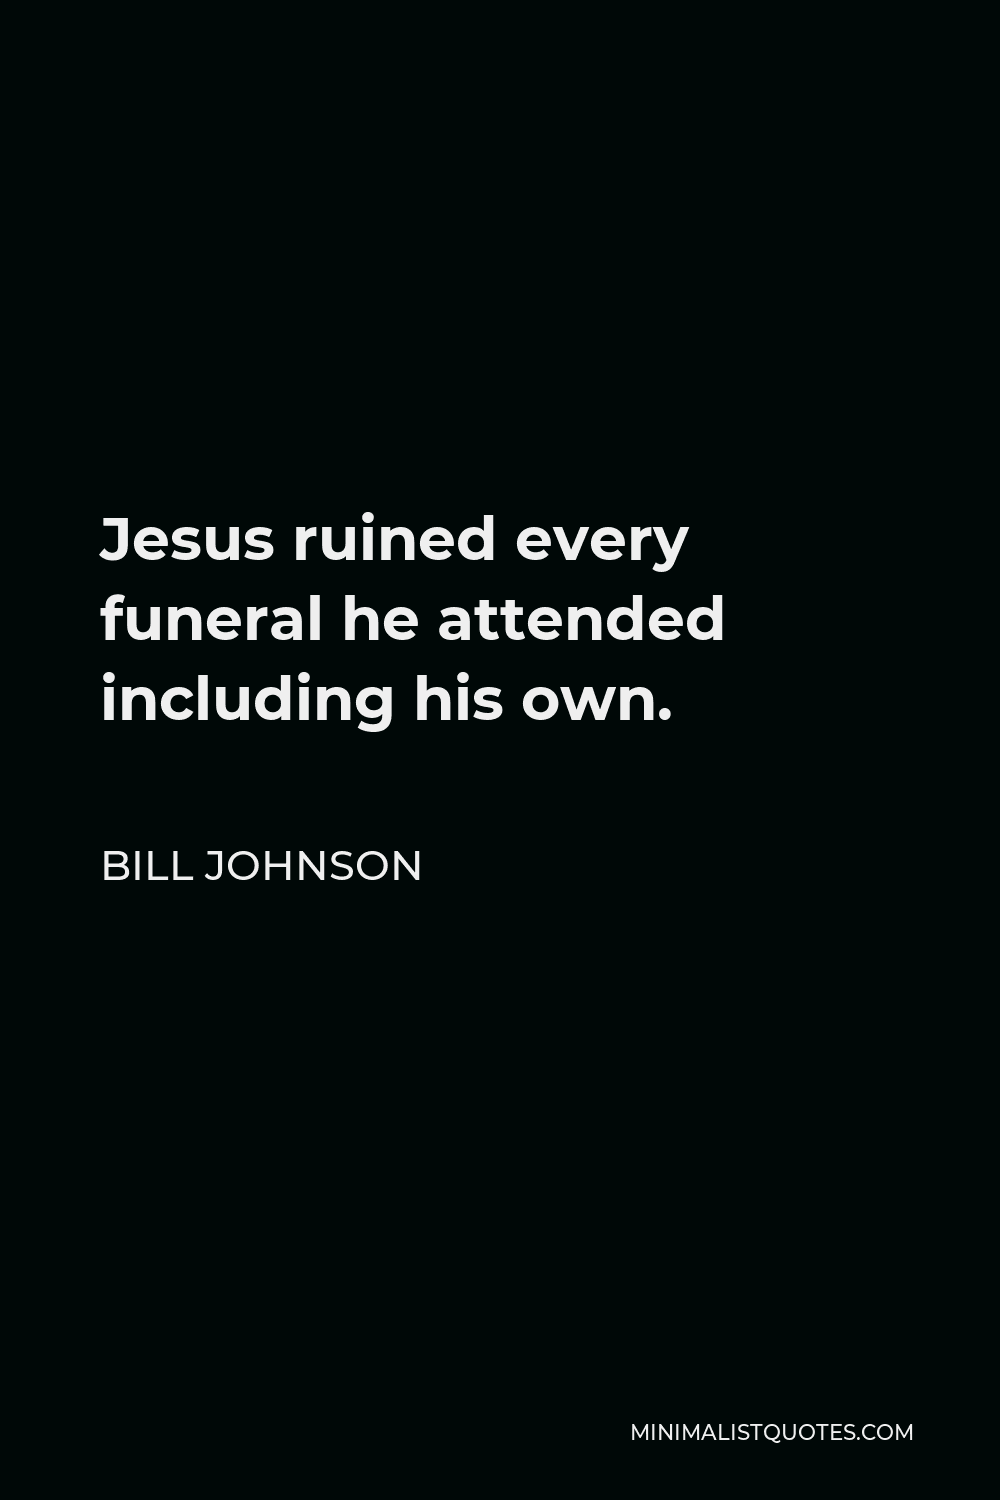 Bill Johnson Quote - Jesus ruined every funeral he attended including his own.